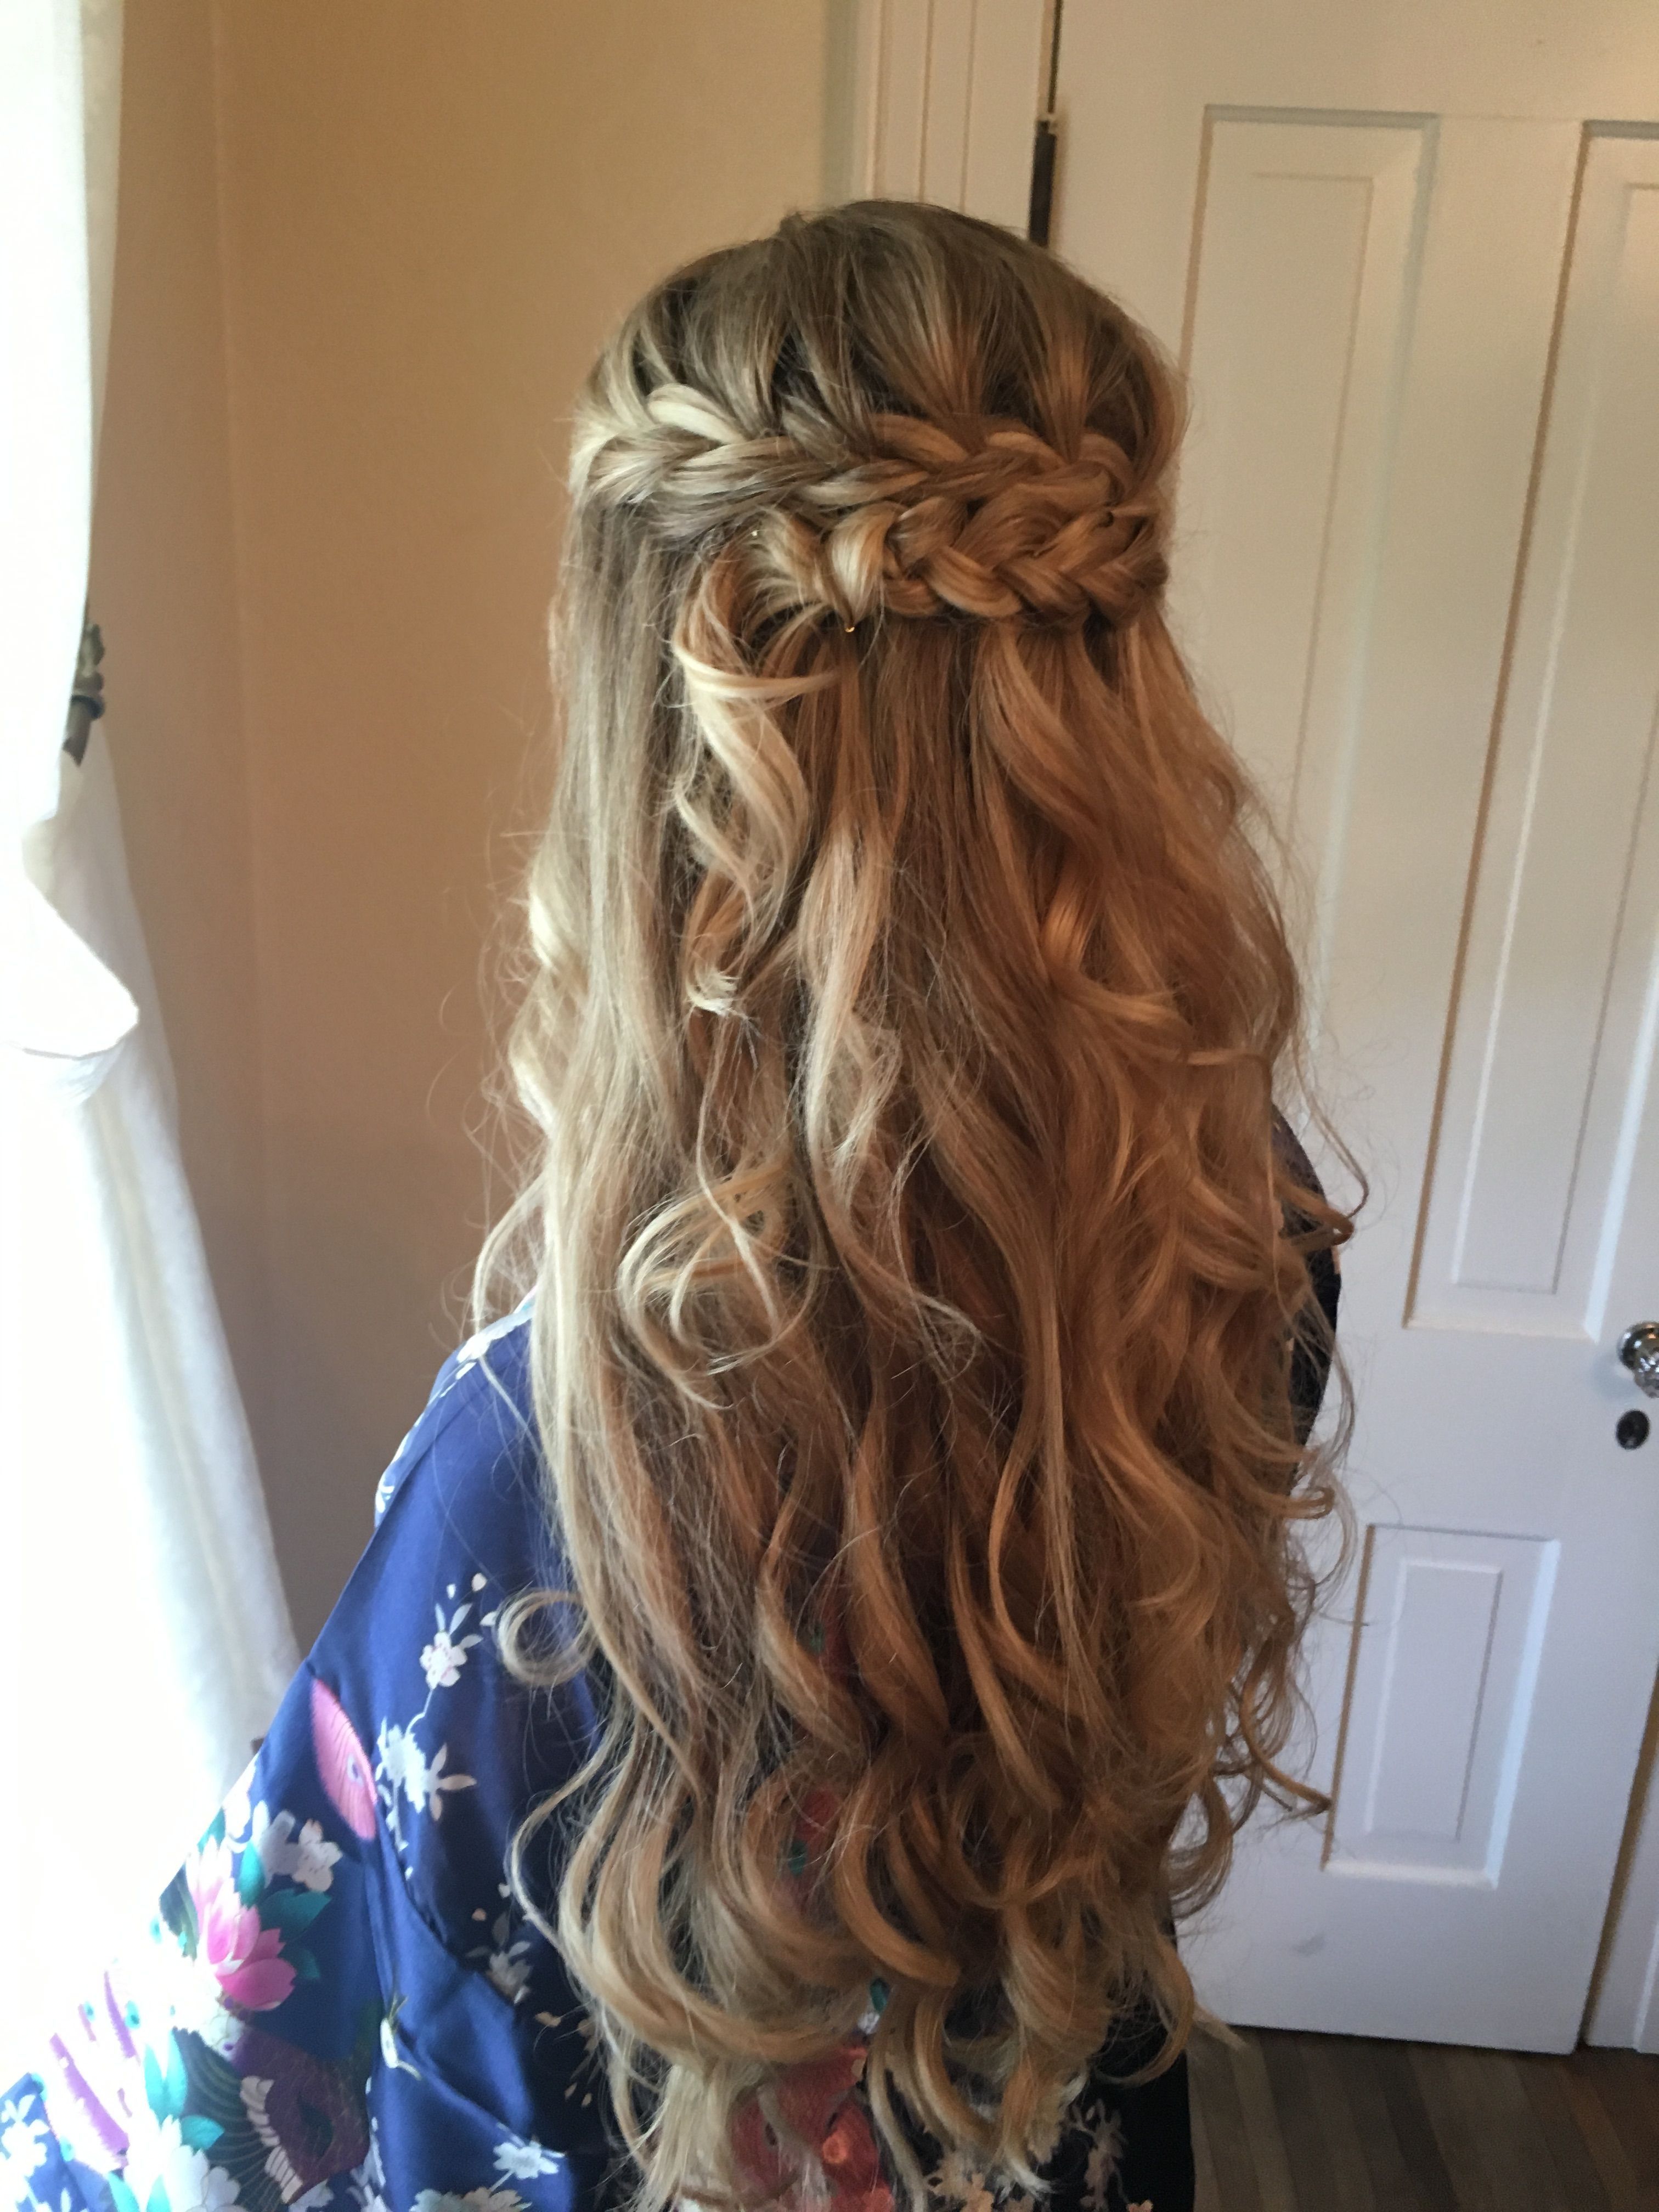 Popular Half Up Curls Hairstyles For Wedding Within Wedding Hairstyle : Half Up Down Do Braid Curls Wedding Hairstyles (View 16 of 20)